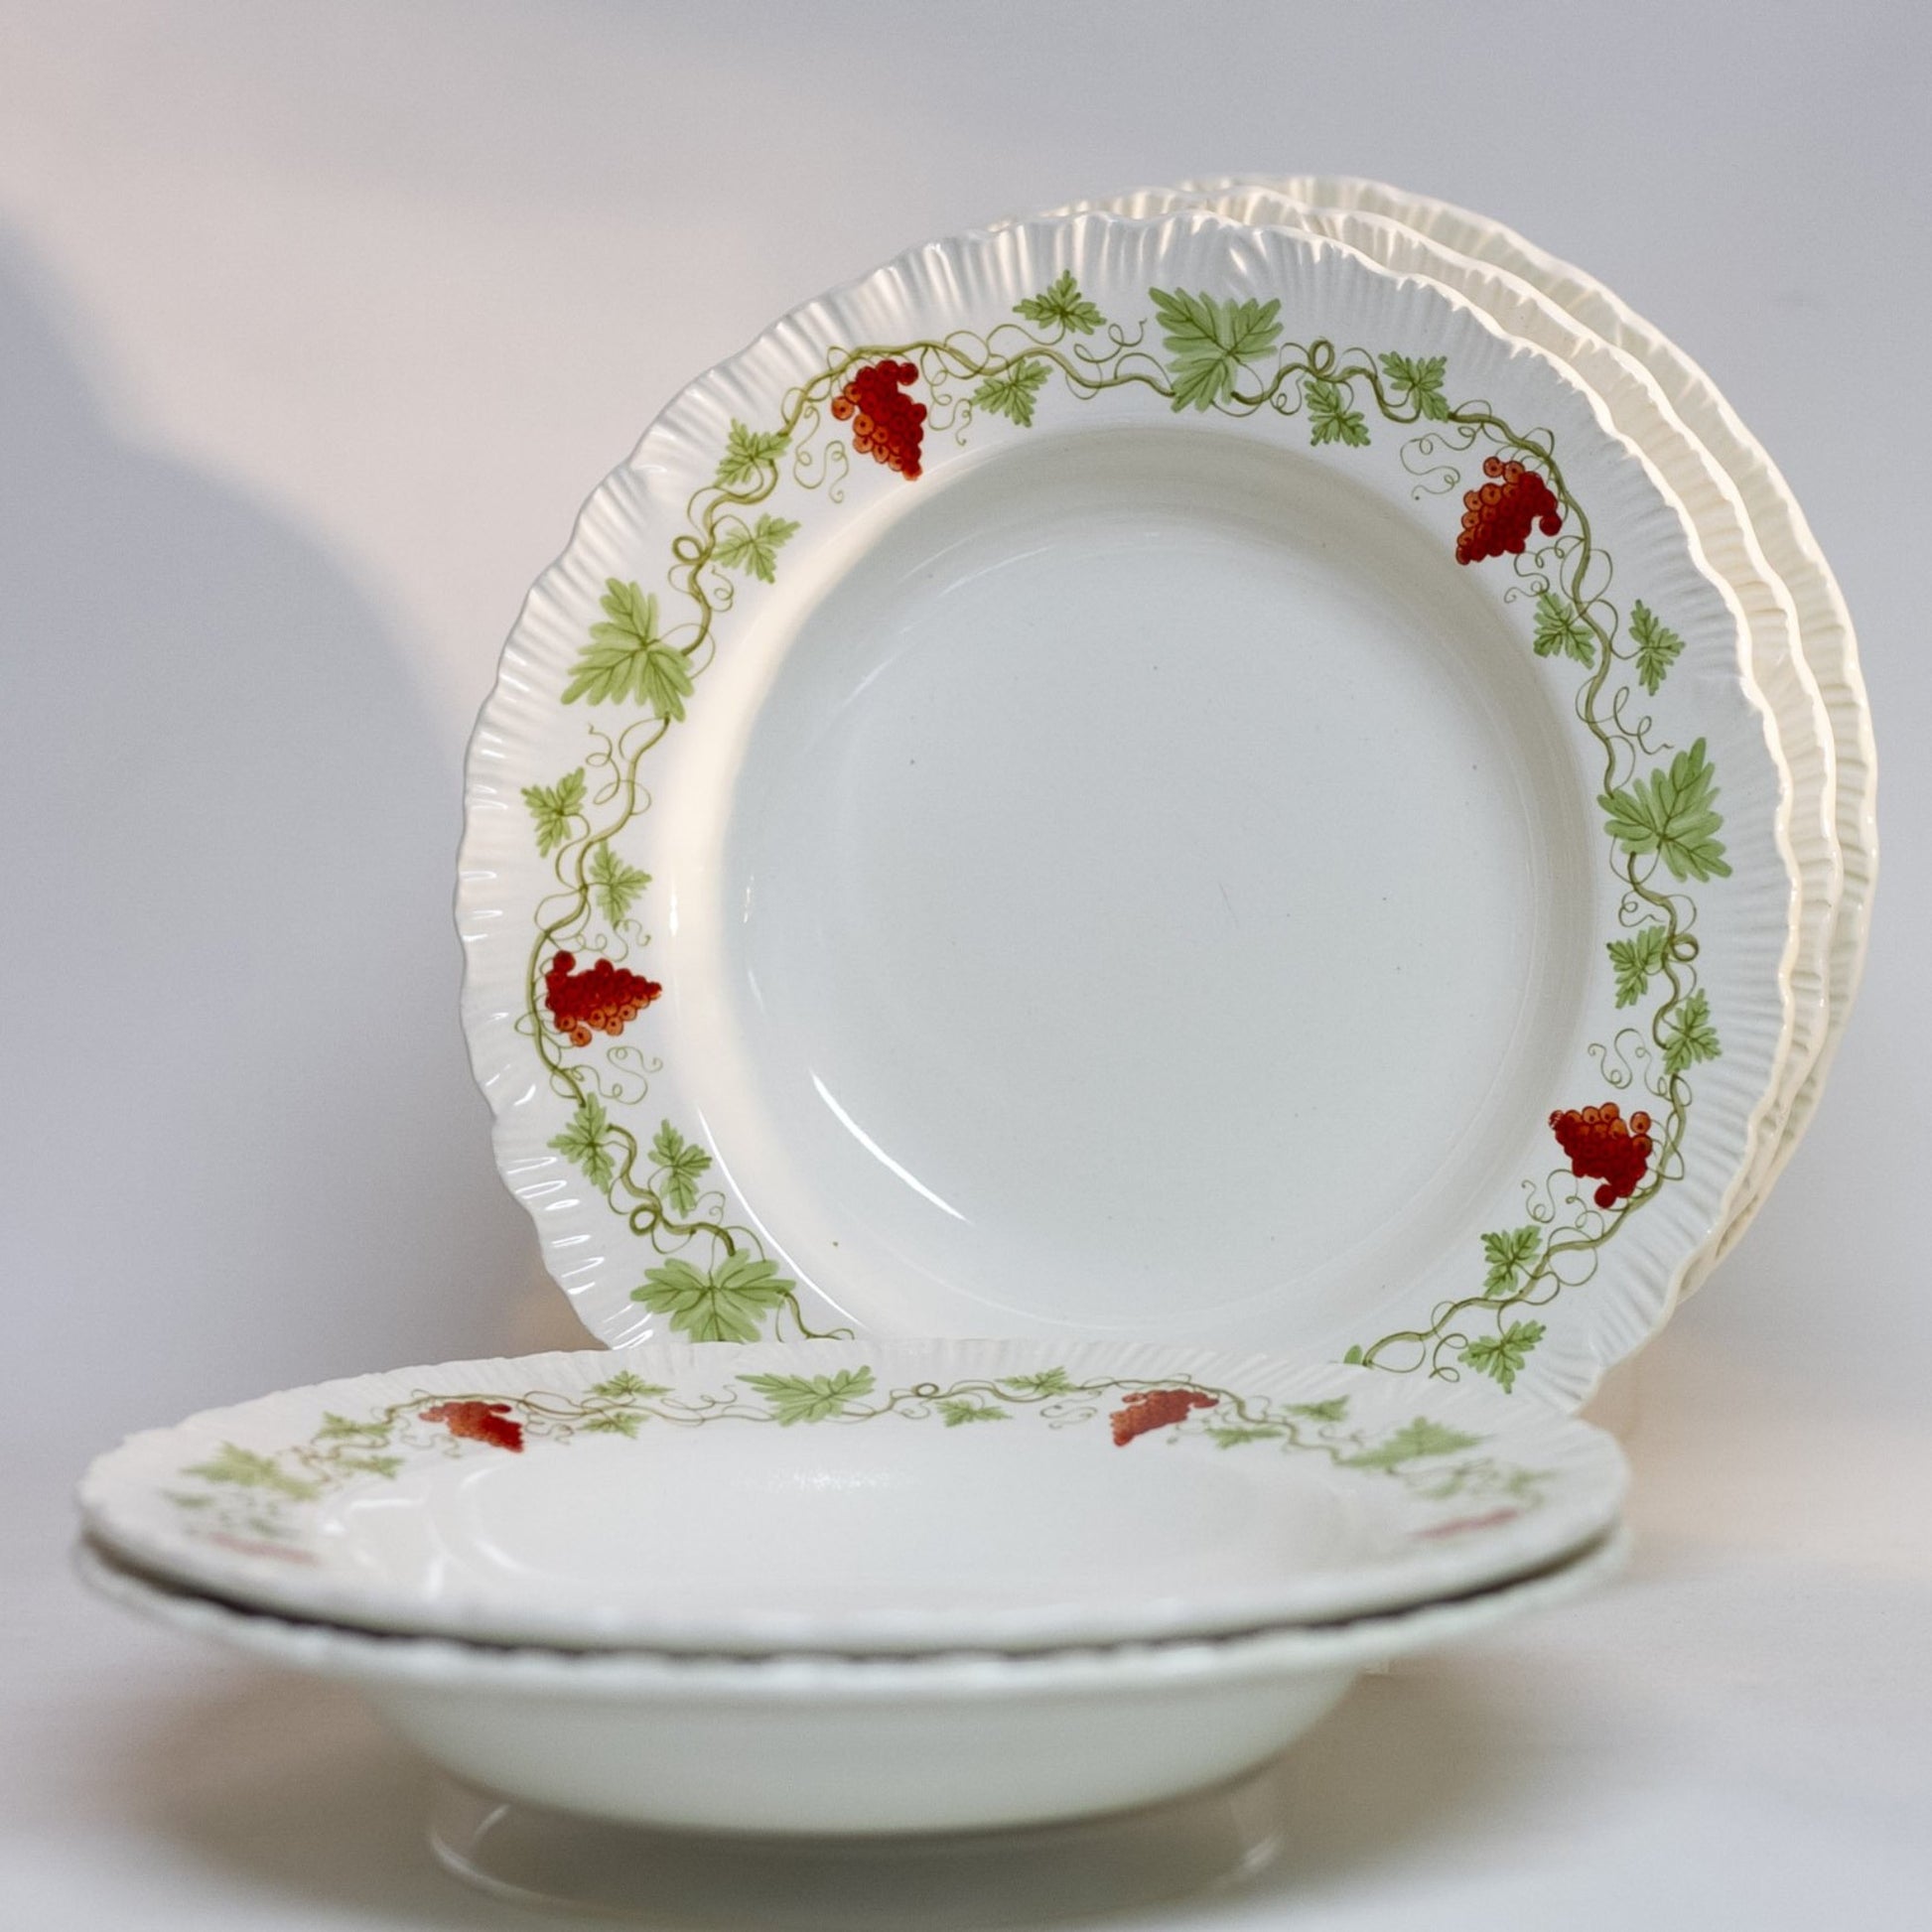 BACCHUS RED by Wedgewood RIMMED SOUP BOWL Circa 1940 - 1974 Discontinued Pattern Made in England